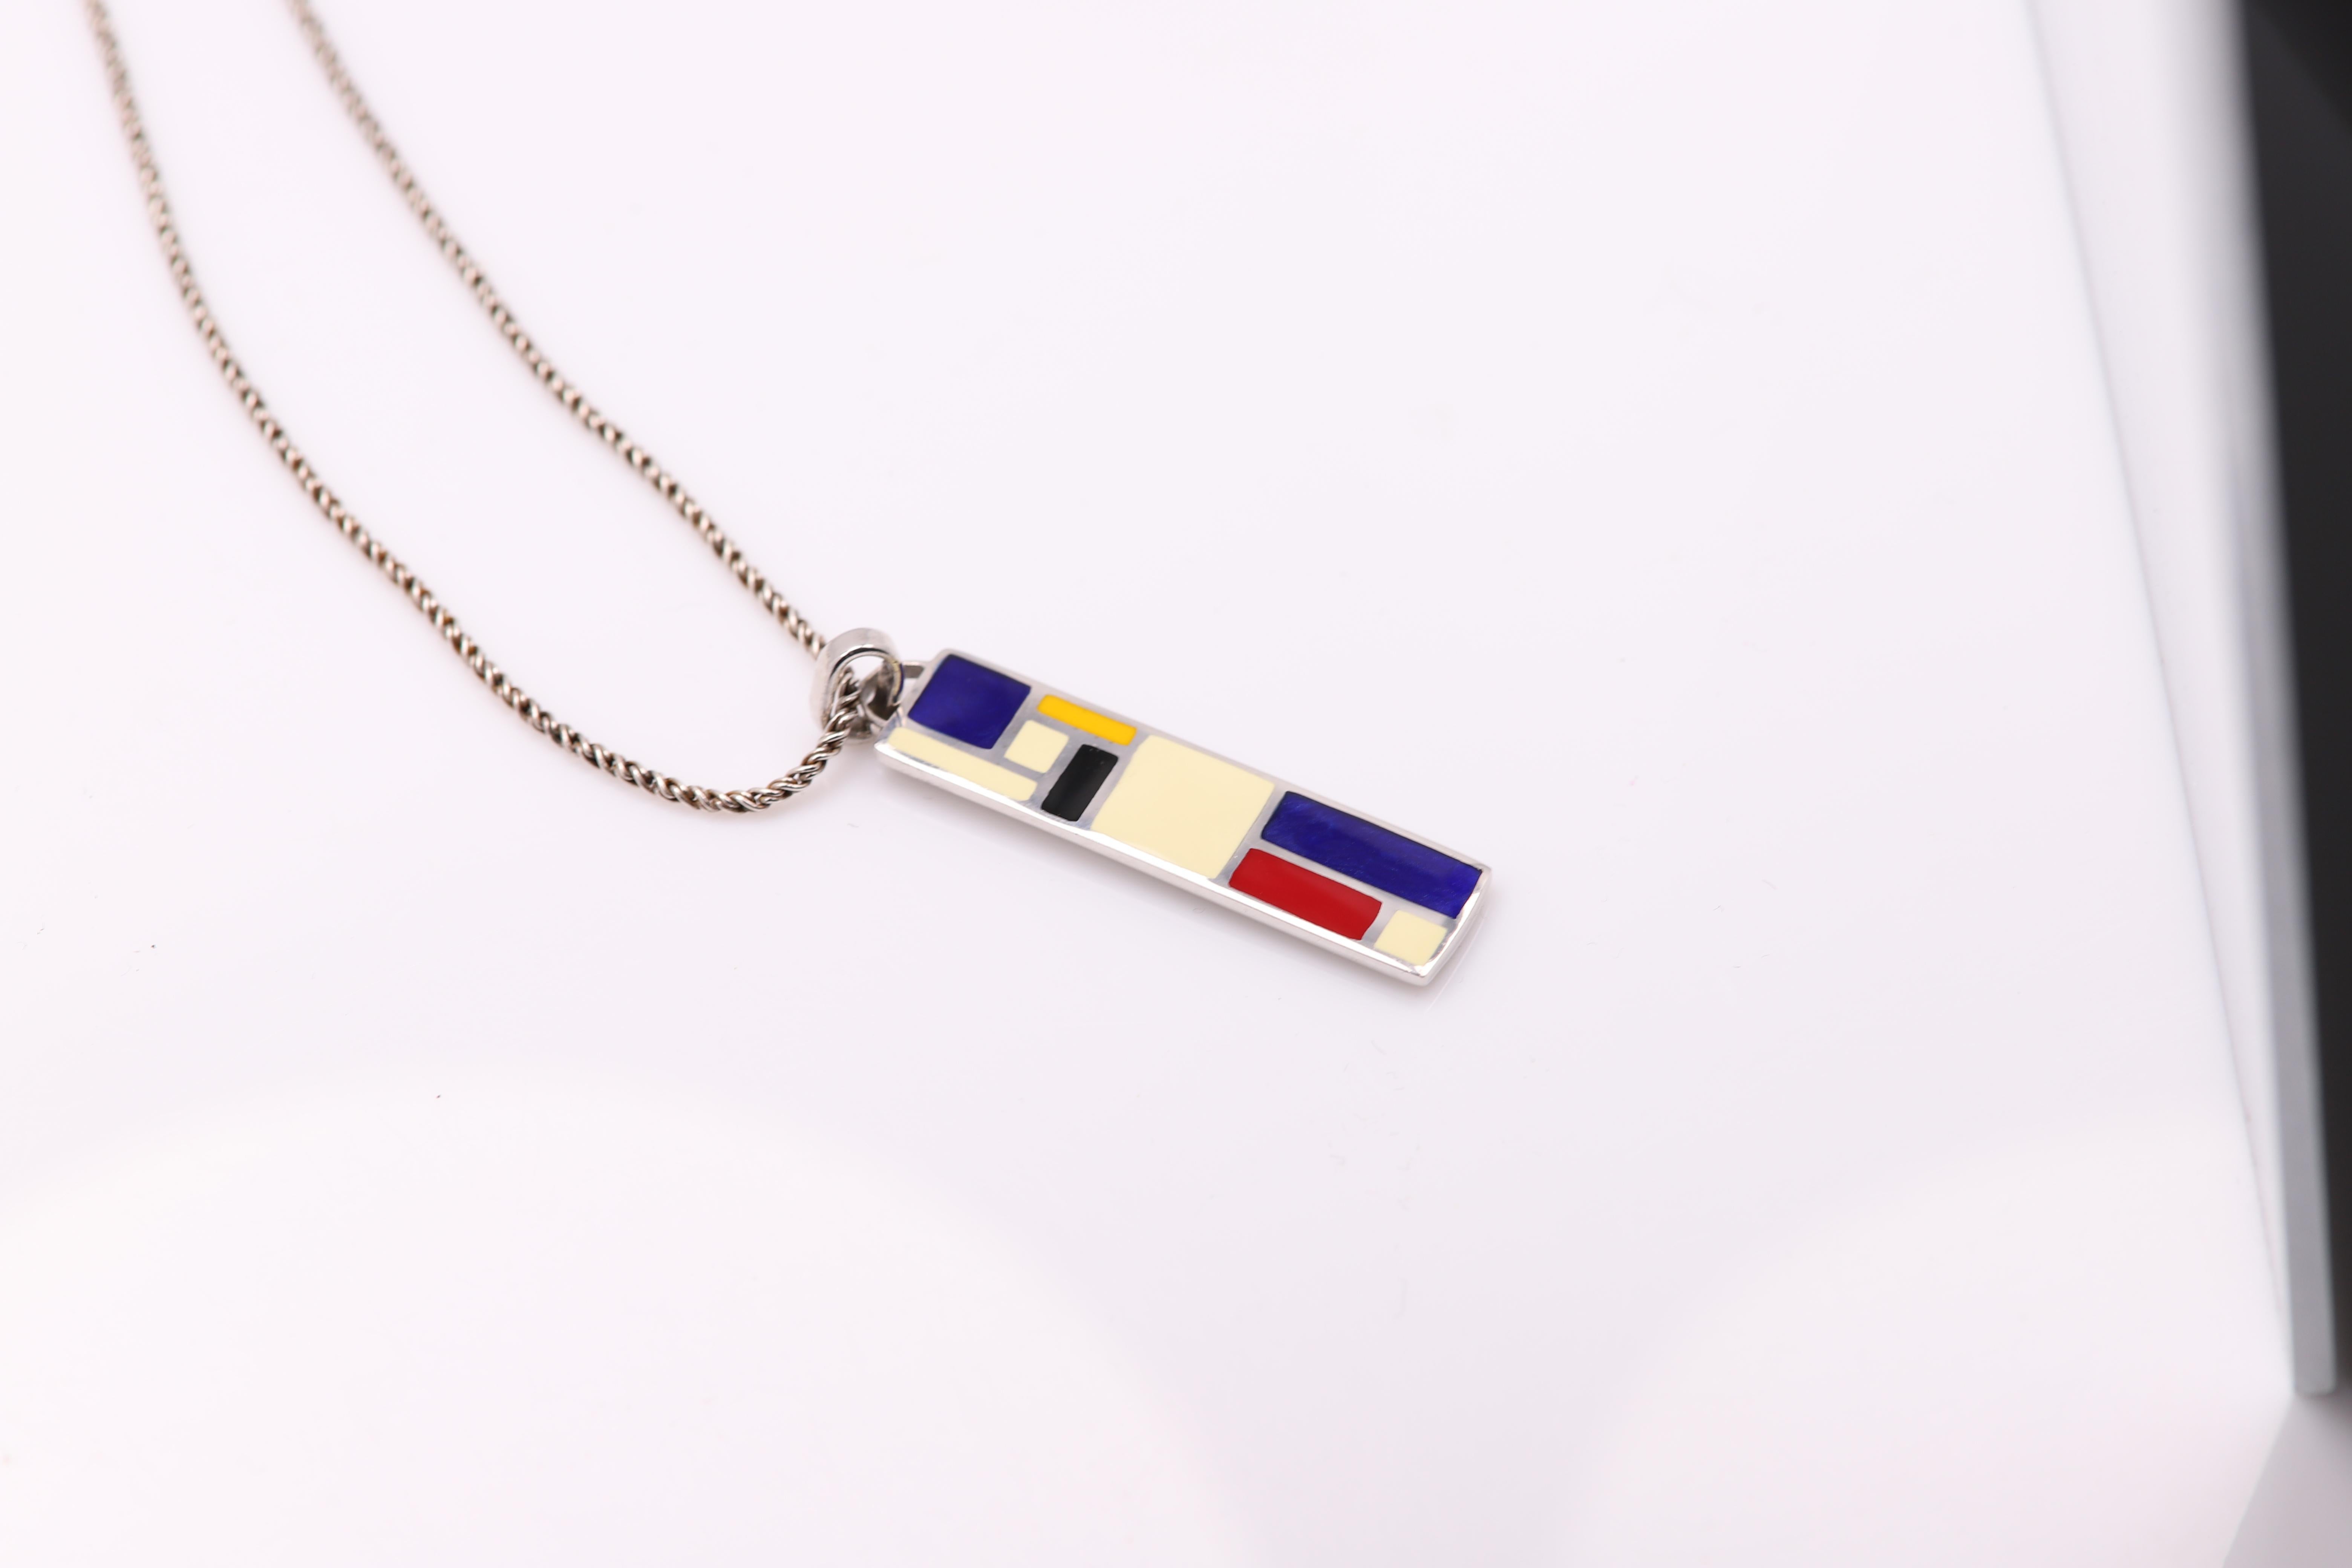 Mondrian Inspired Art Pendant Sterling Silver Enamel Fine Art Jewelry In New Condition For Sale In Brooklyn, NY